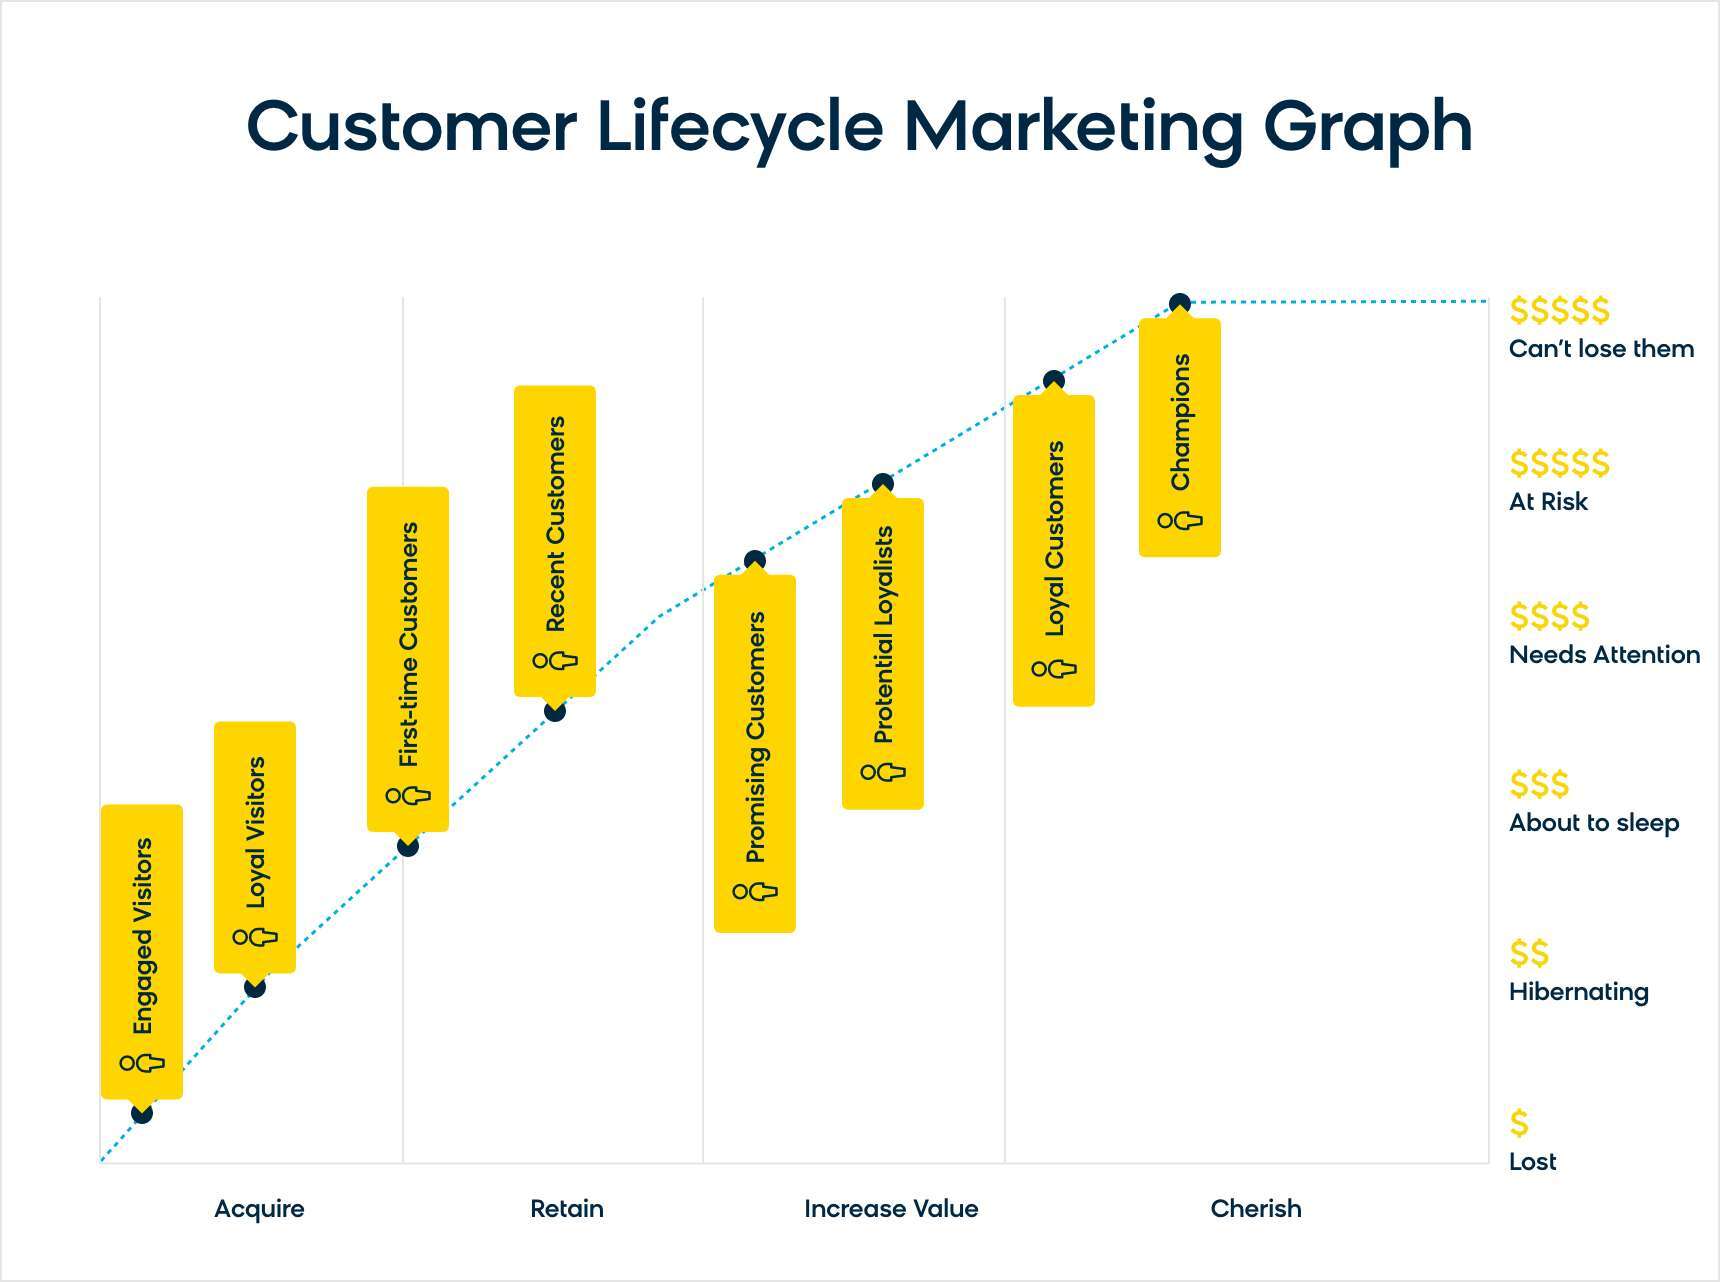 A Customer Lifecycle Marketing graph depicting the different customer segments for management